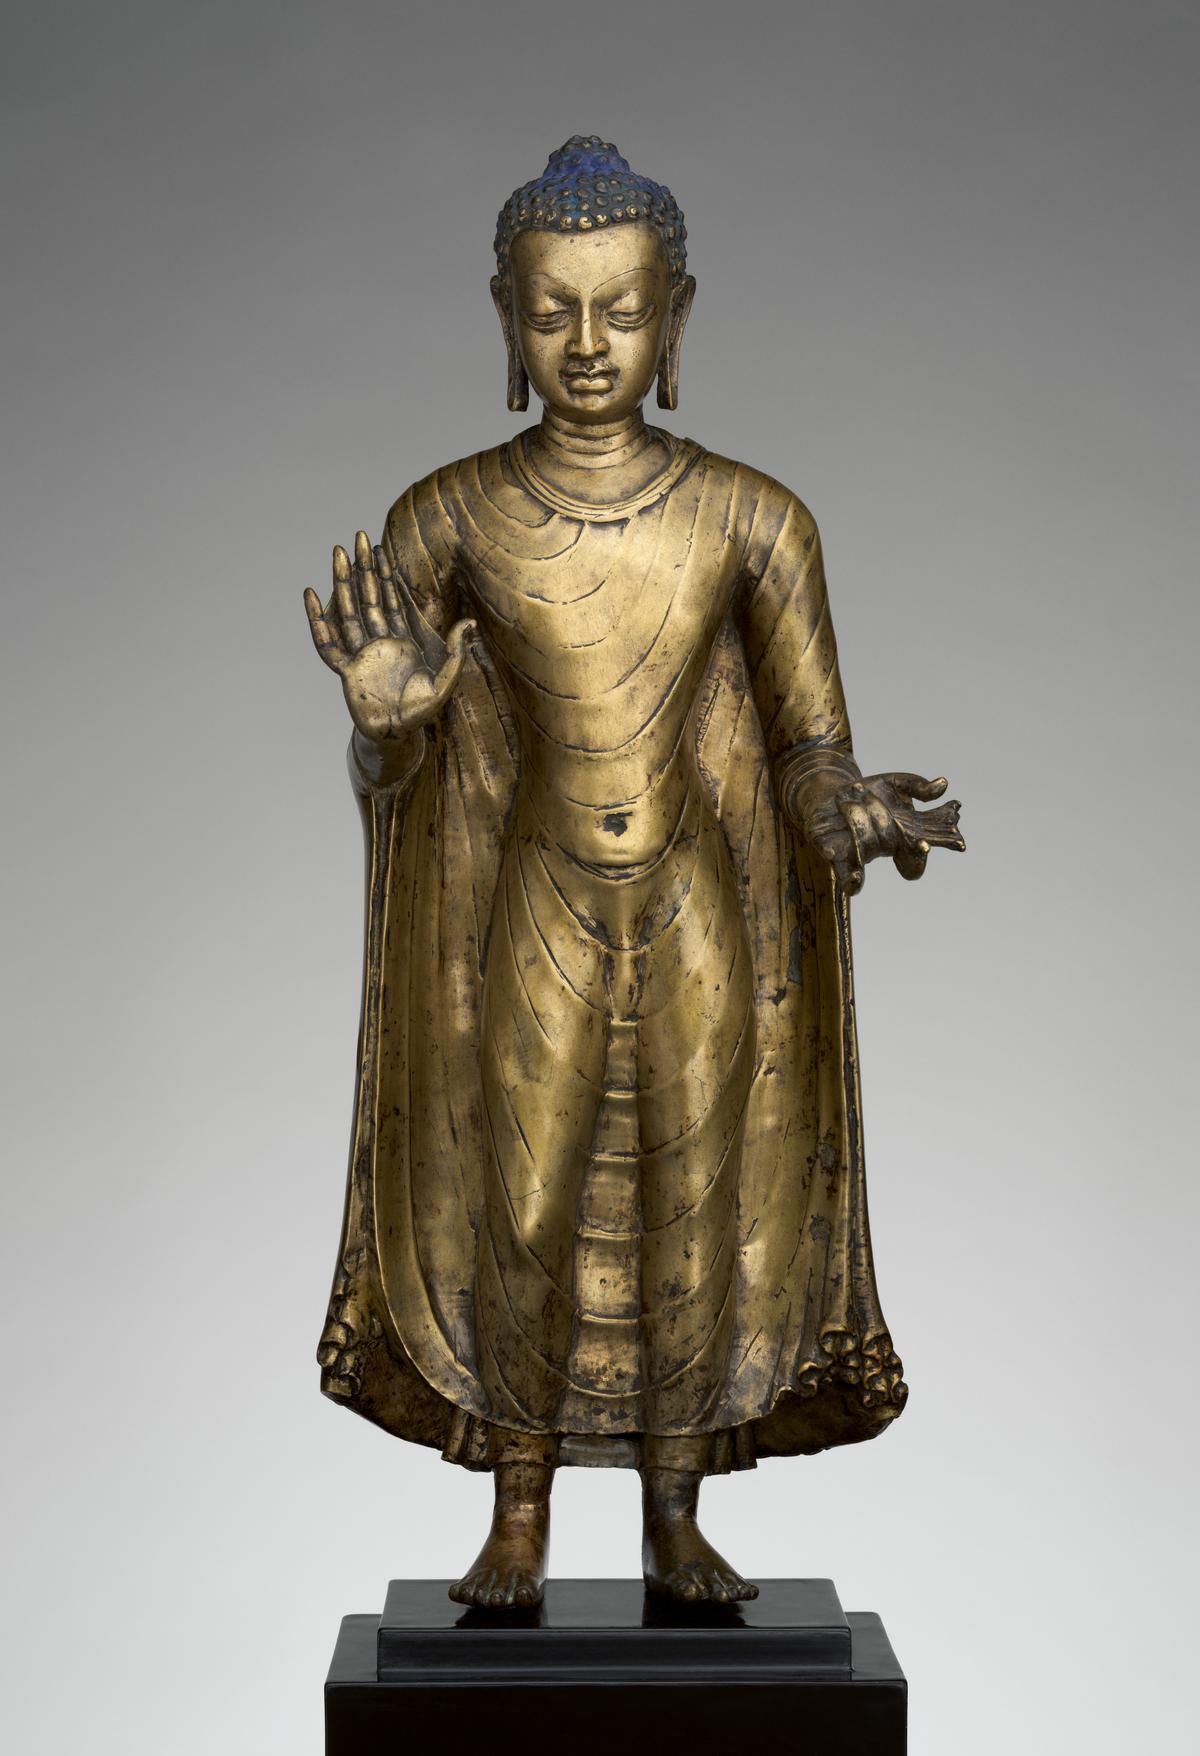 The Buddha offers protection, material from the MAP Academy's Art Encyclopedia 